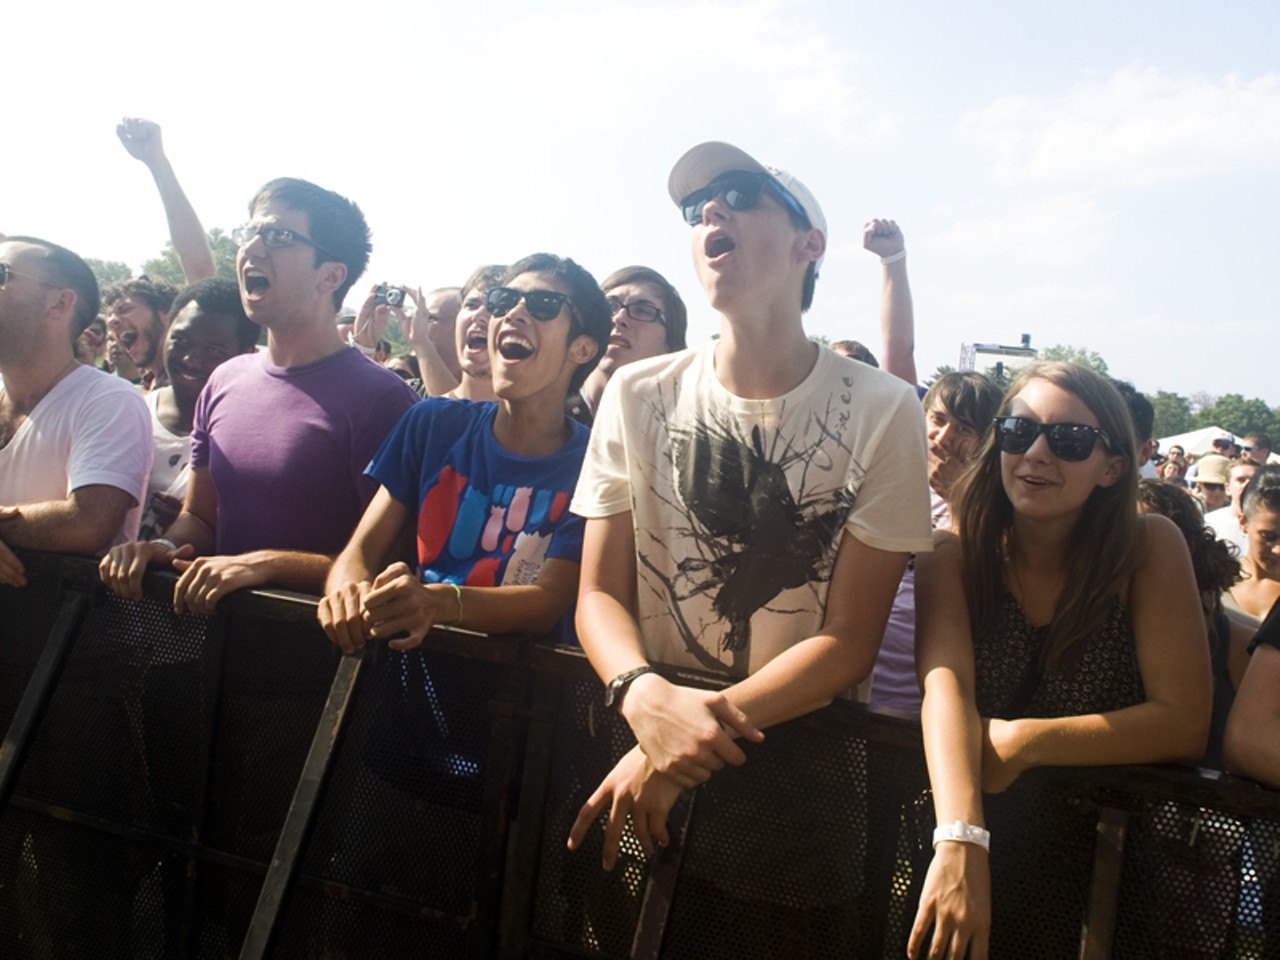 A scene from the crowd at Titus Andronicus at LouFest.